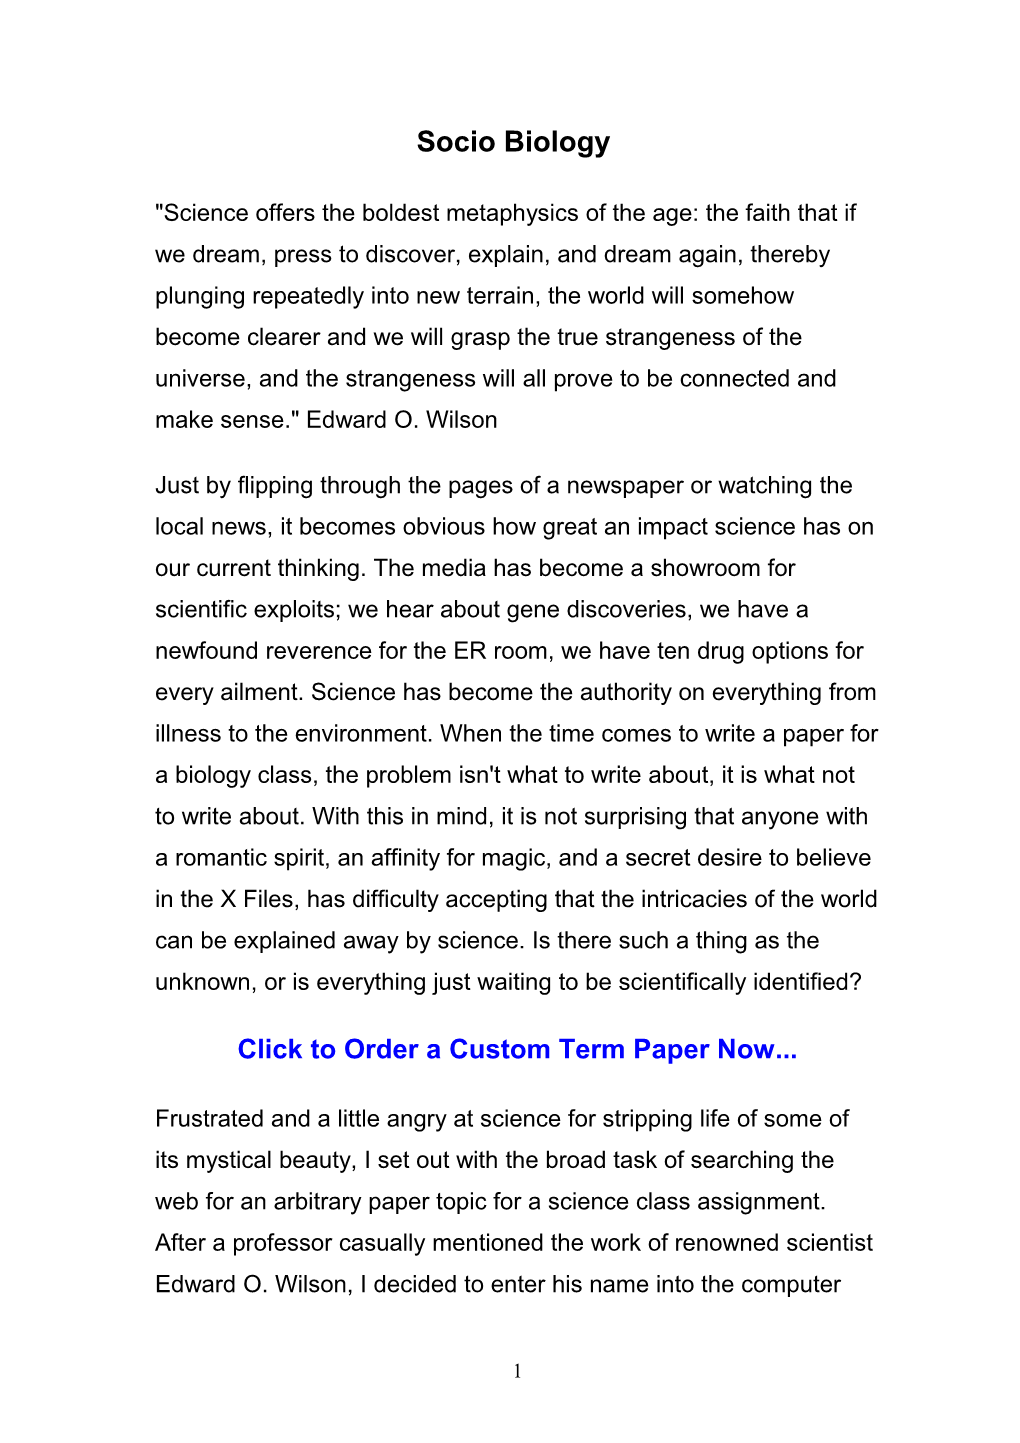 Click to Order a Custom Term Paper Now